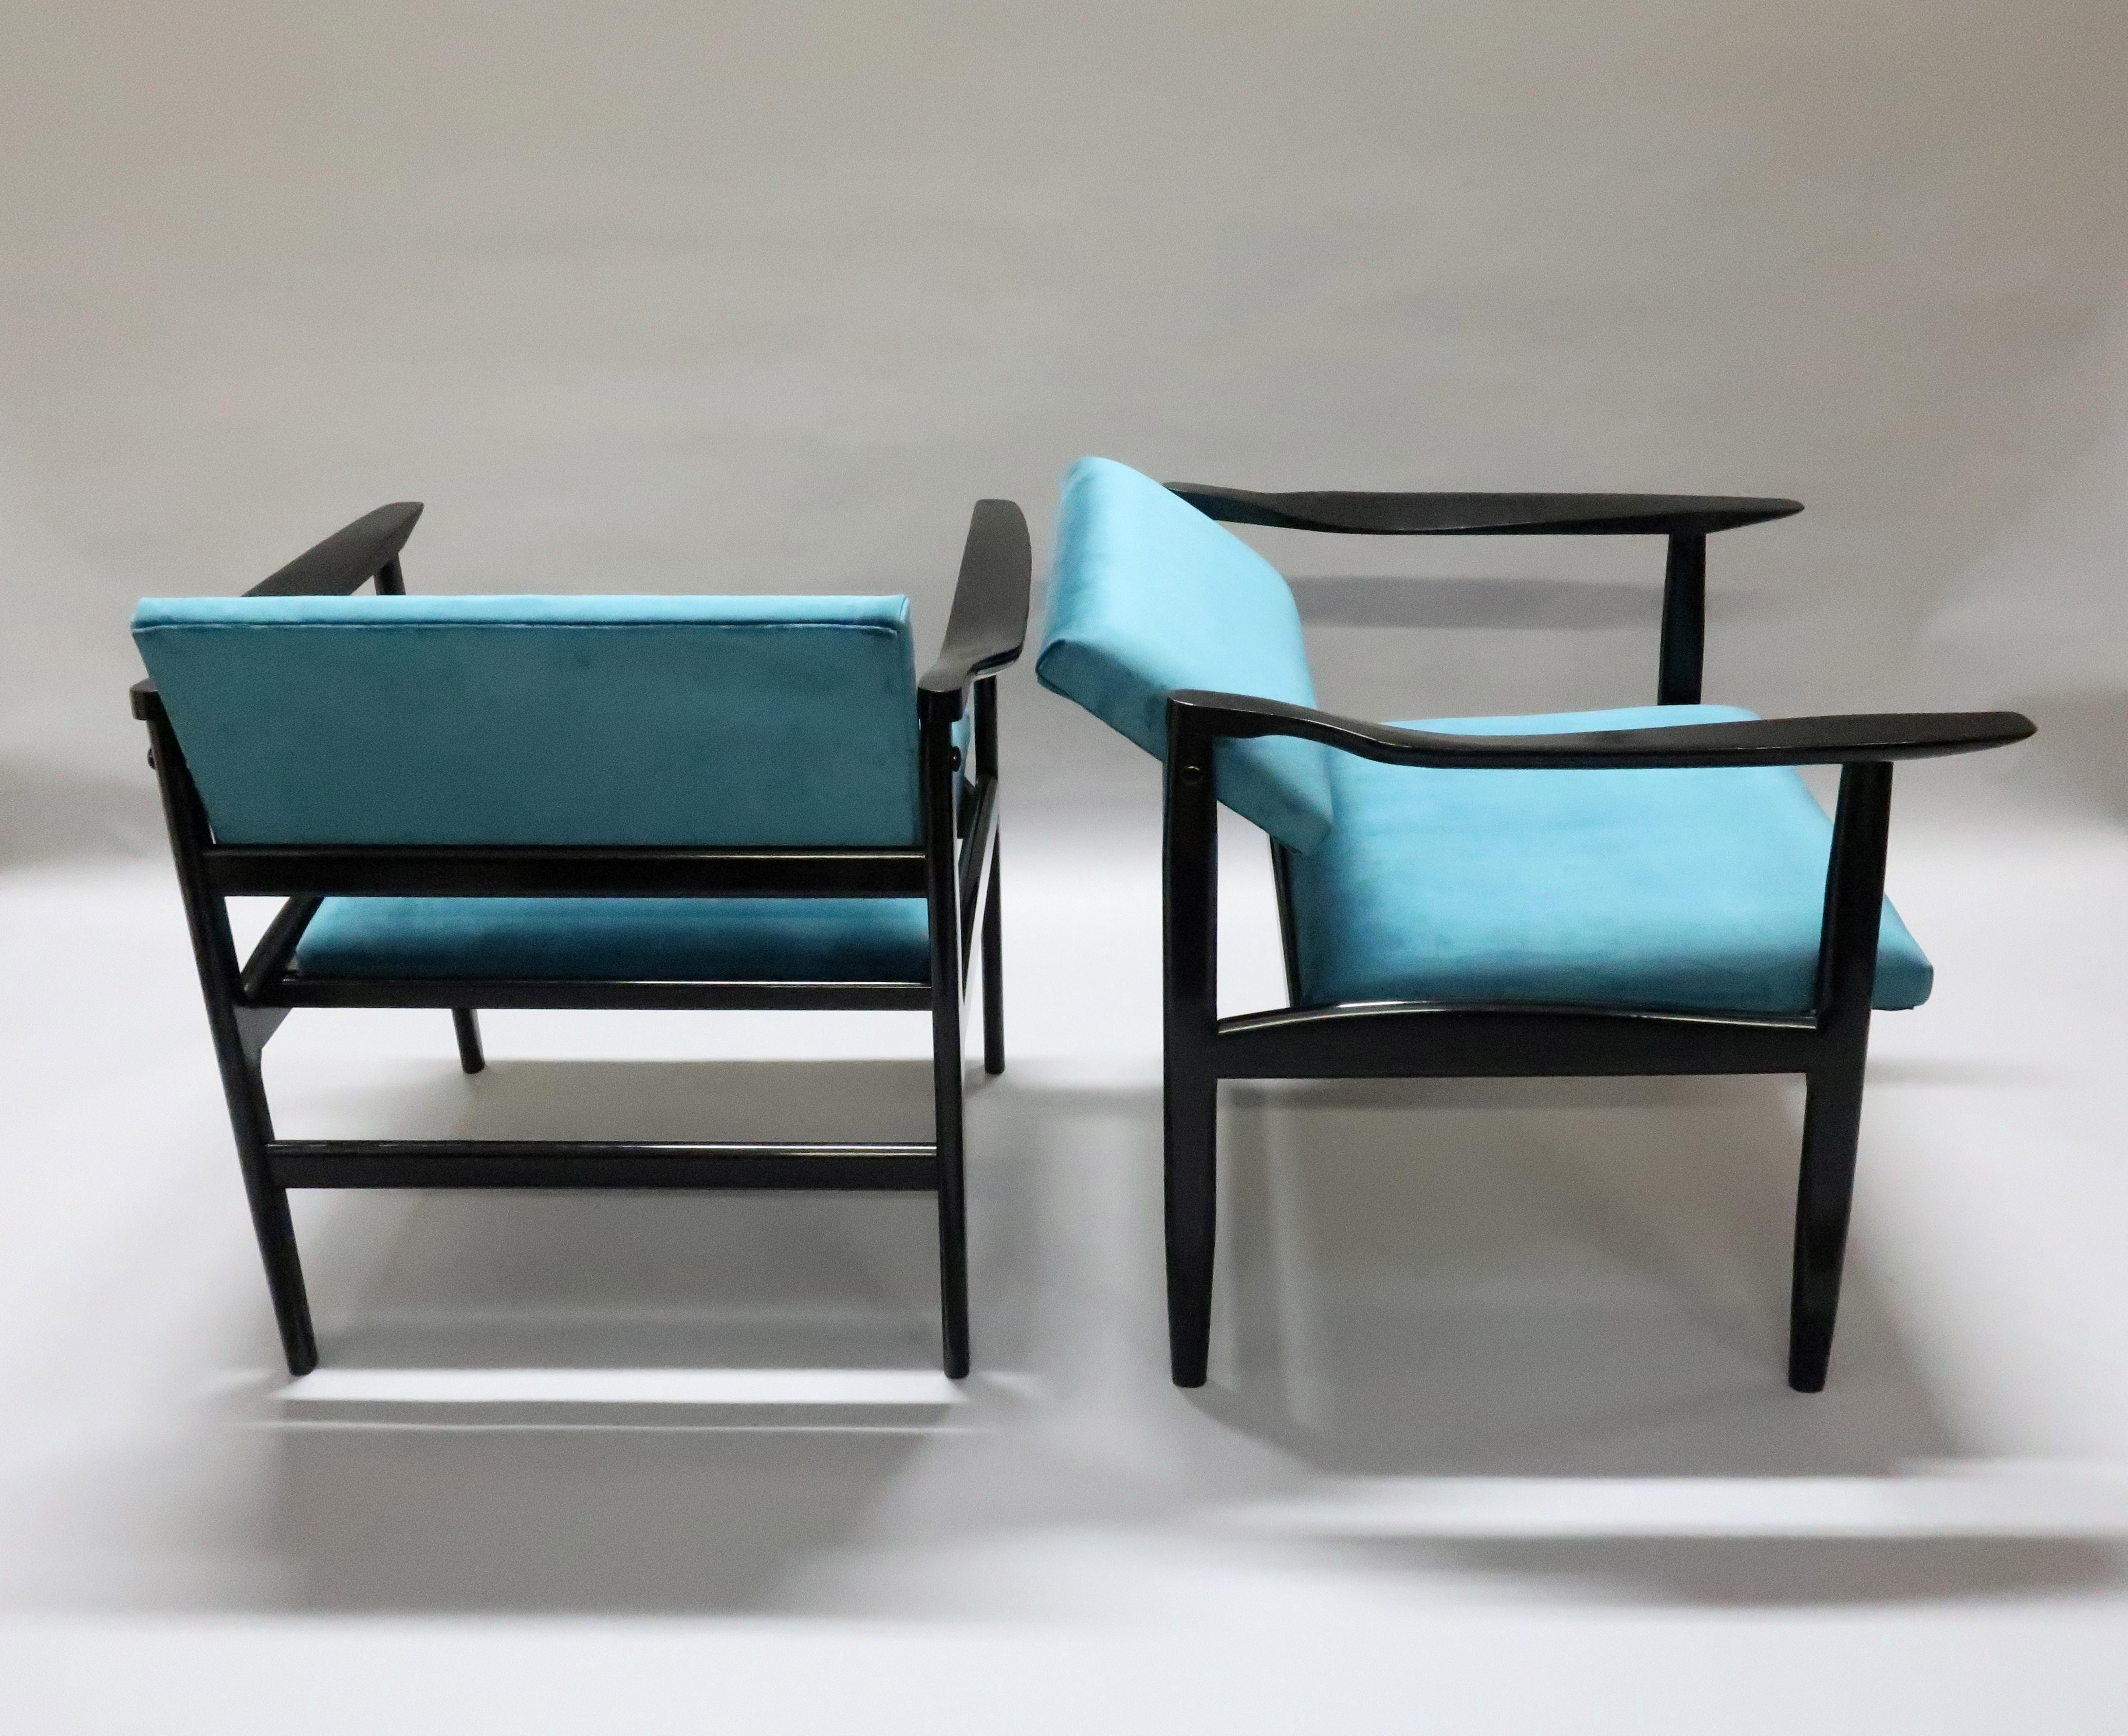 Pair of Italian Midcentury Ebonized Armchairs Upholstered in Teal Velvet In Good Condition For Sale In Macclesfield, GB